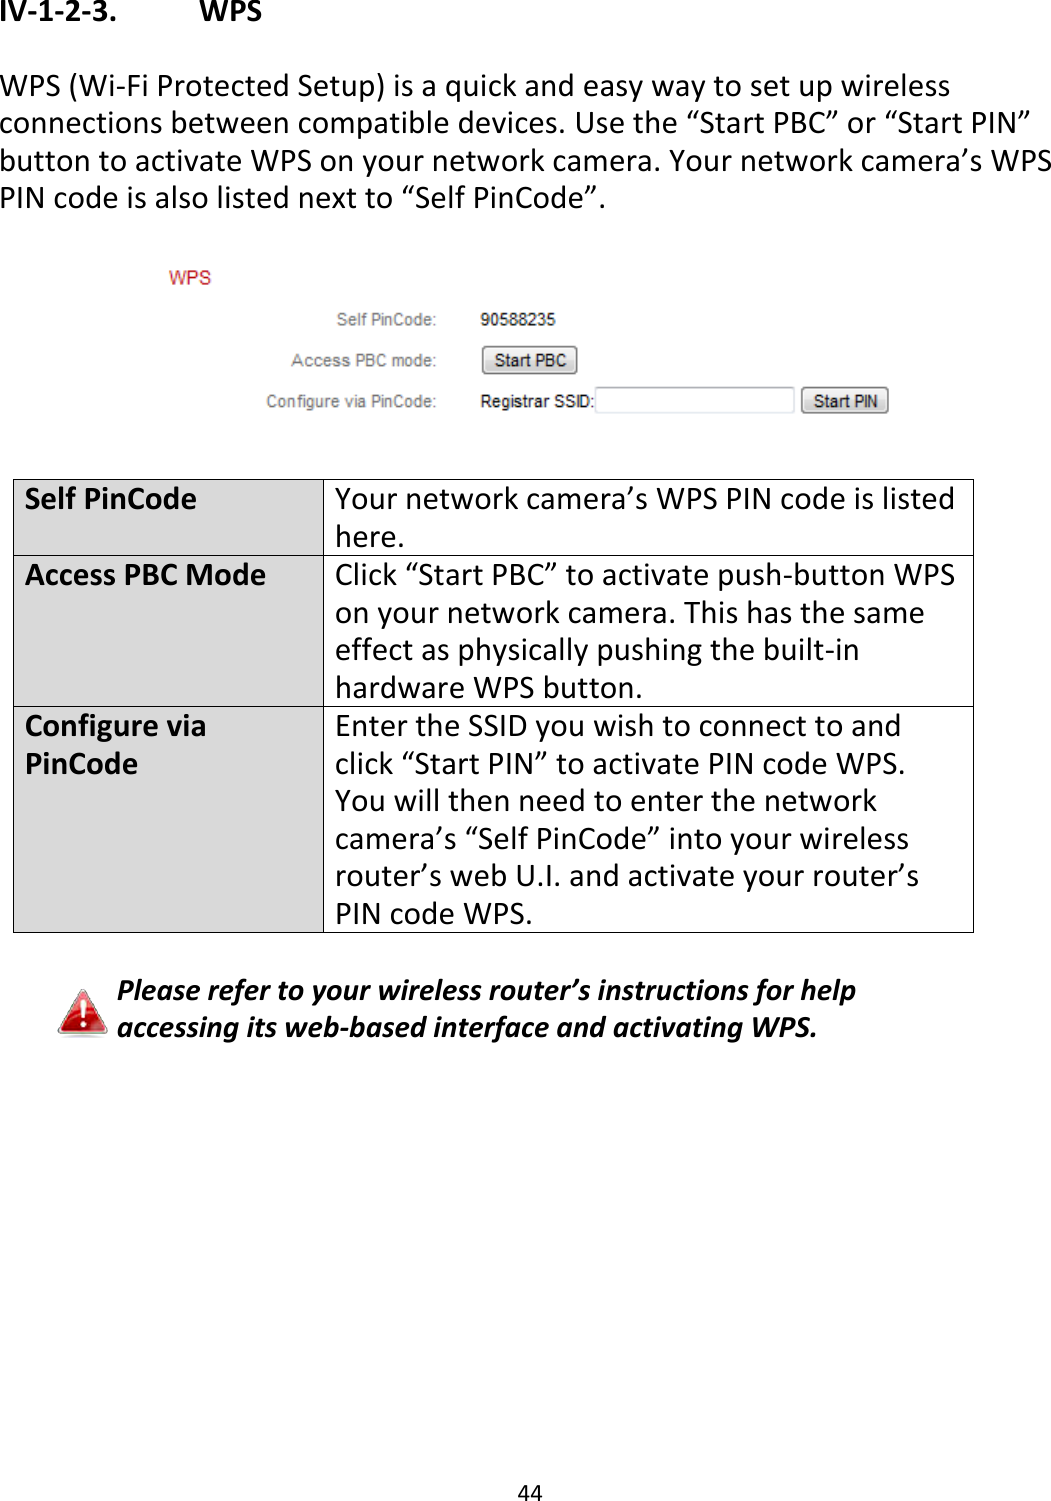 44   IV-1-2-3.    WPS  WPS (Wi-Fi Protected Setup) is a quick and easy way to set up wireless connections between compatible devices. Use the “Start PBC” or “Start PIN” button to activate WPS on your network camera. Your network camera’s WPS PIN code is also listed next to “Self PinCode”.    Self PinCode Your network camera’s WPS PIN code is listed here. Access PBC Mode Click “Start PBC” to activate push-button WPS on your network camera. This has the same effect as physically pushing the built-in hardware WPS button. Configure via PinCode Enter the SSID you wish to connect to and click “Start PIN” to activate PIN code WPS. You will then need to enter the network camera’s “Self PinCode” into your wireless router’s web U.I. and activate your router’s PIN code WPS.  Please refer to your wireless router’s instructions for help accessing its web-based interface and activating WPS.   